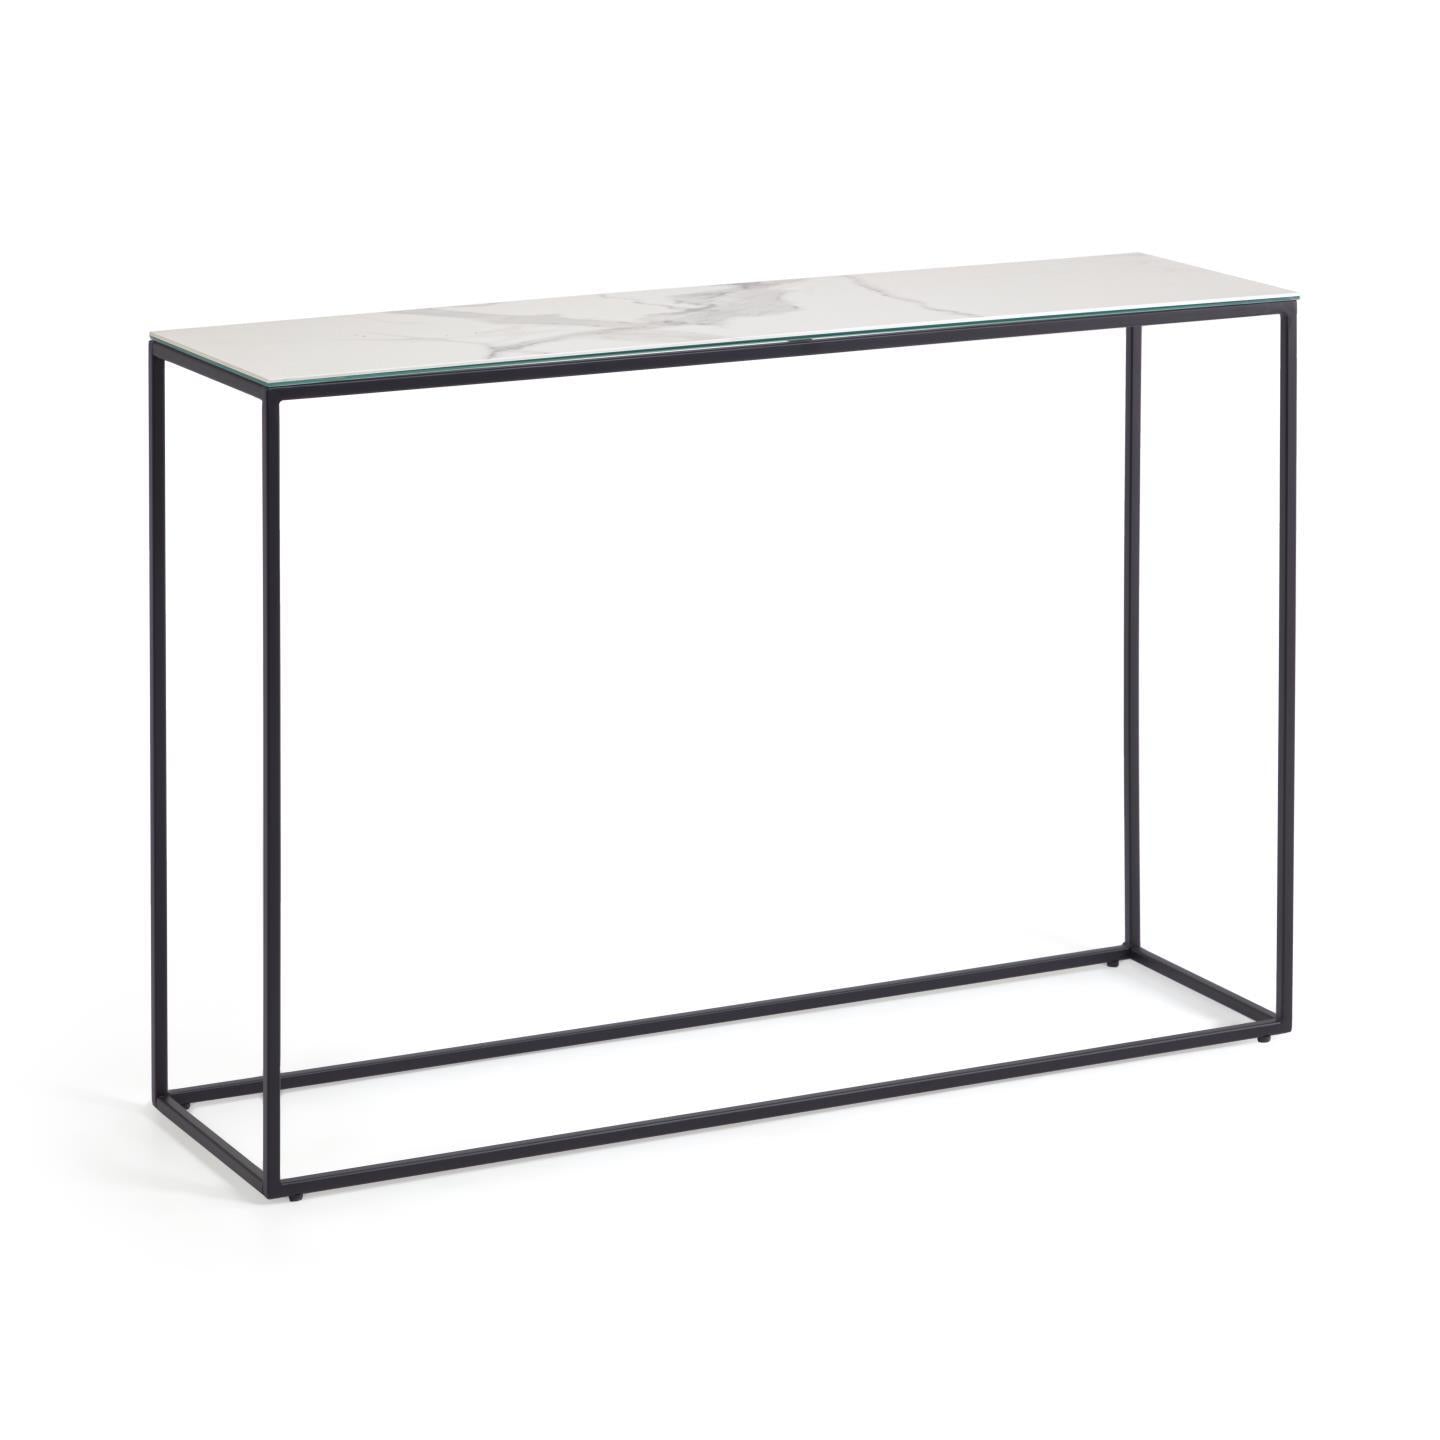 Rewena console table with Kalos Blanco porcelain top and steel structure, 110 x 75 cm